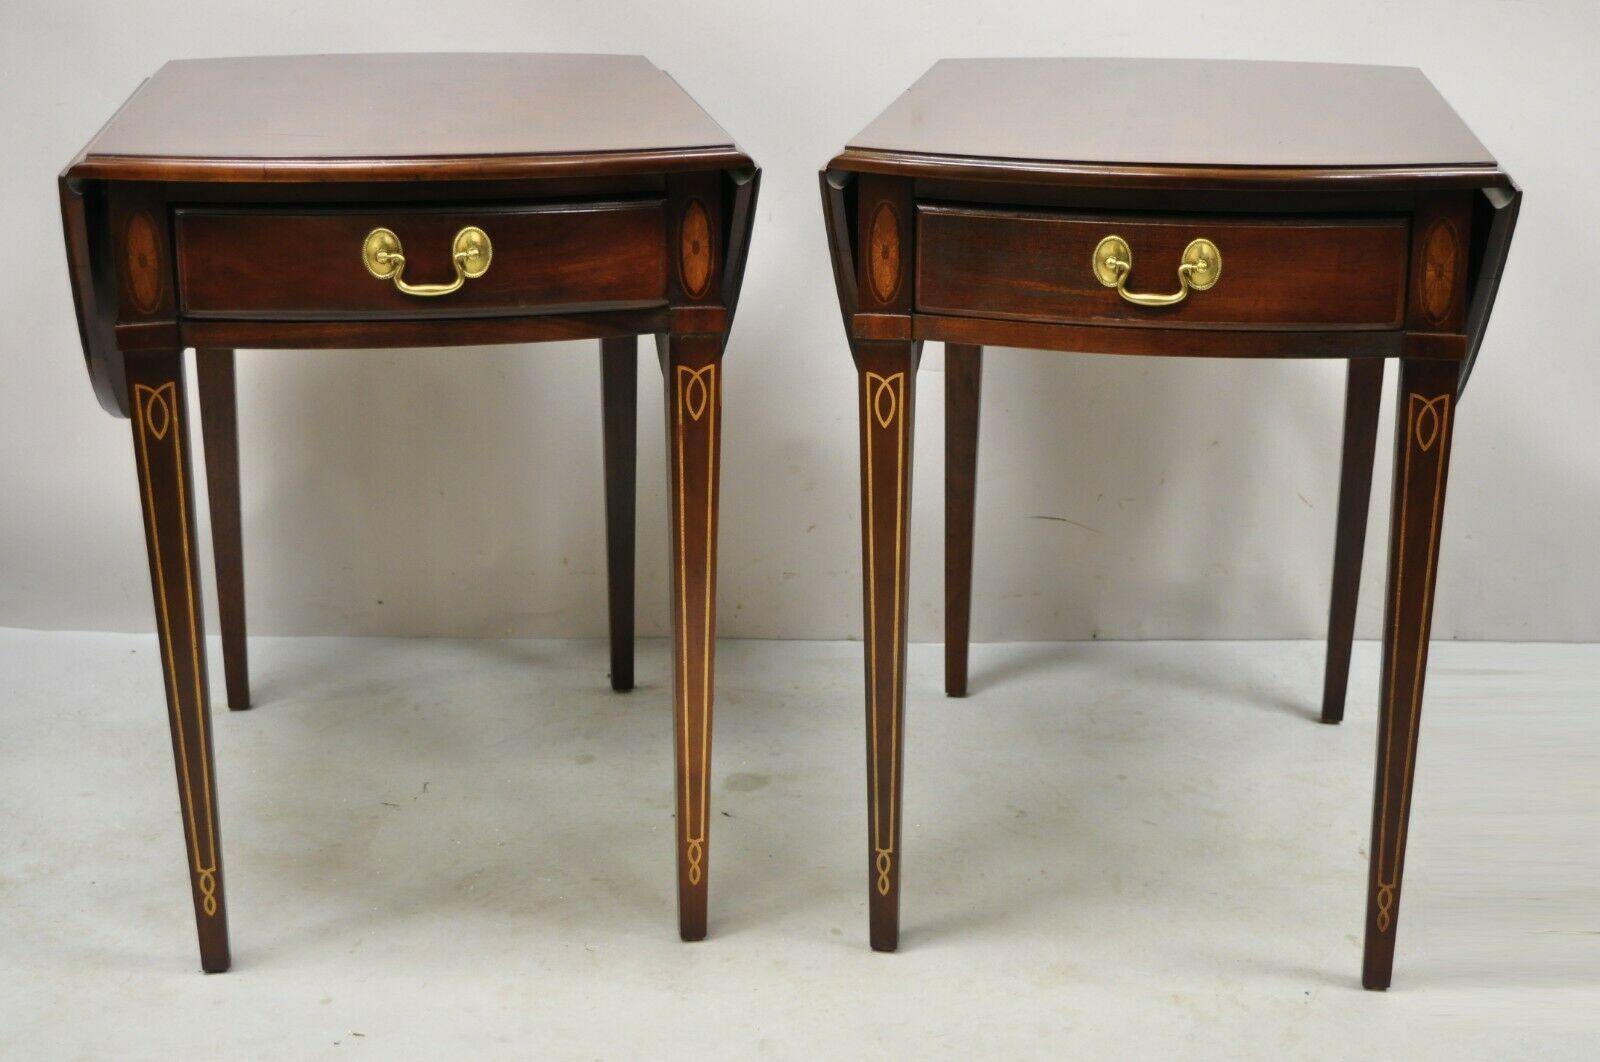 Federal Sheraton Style mahogany pembroke side tables with inlay By Hammary - a pair. Item features a satinwood pin wheel and pencil inlay, drop leaf sides, finished back, 1 dovetailed drawer, tapered legs, solid brass hardware, great style and form.